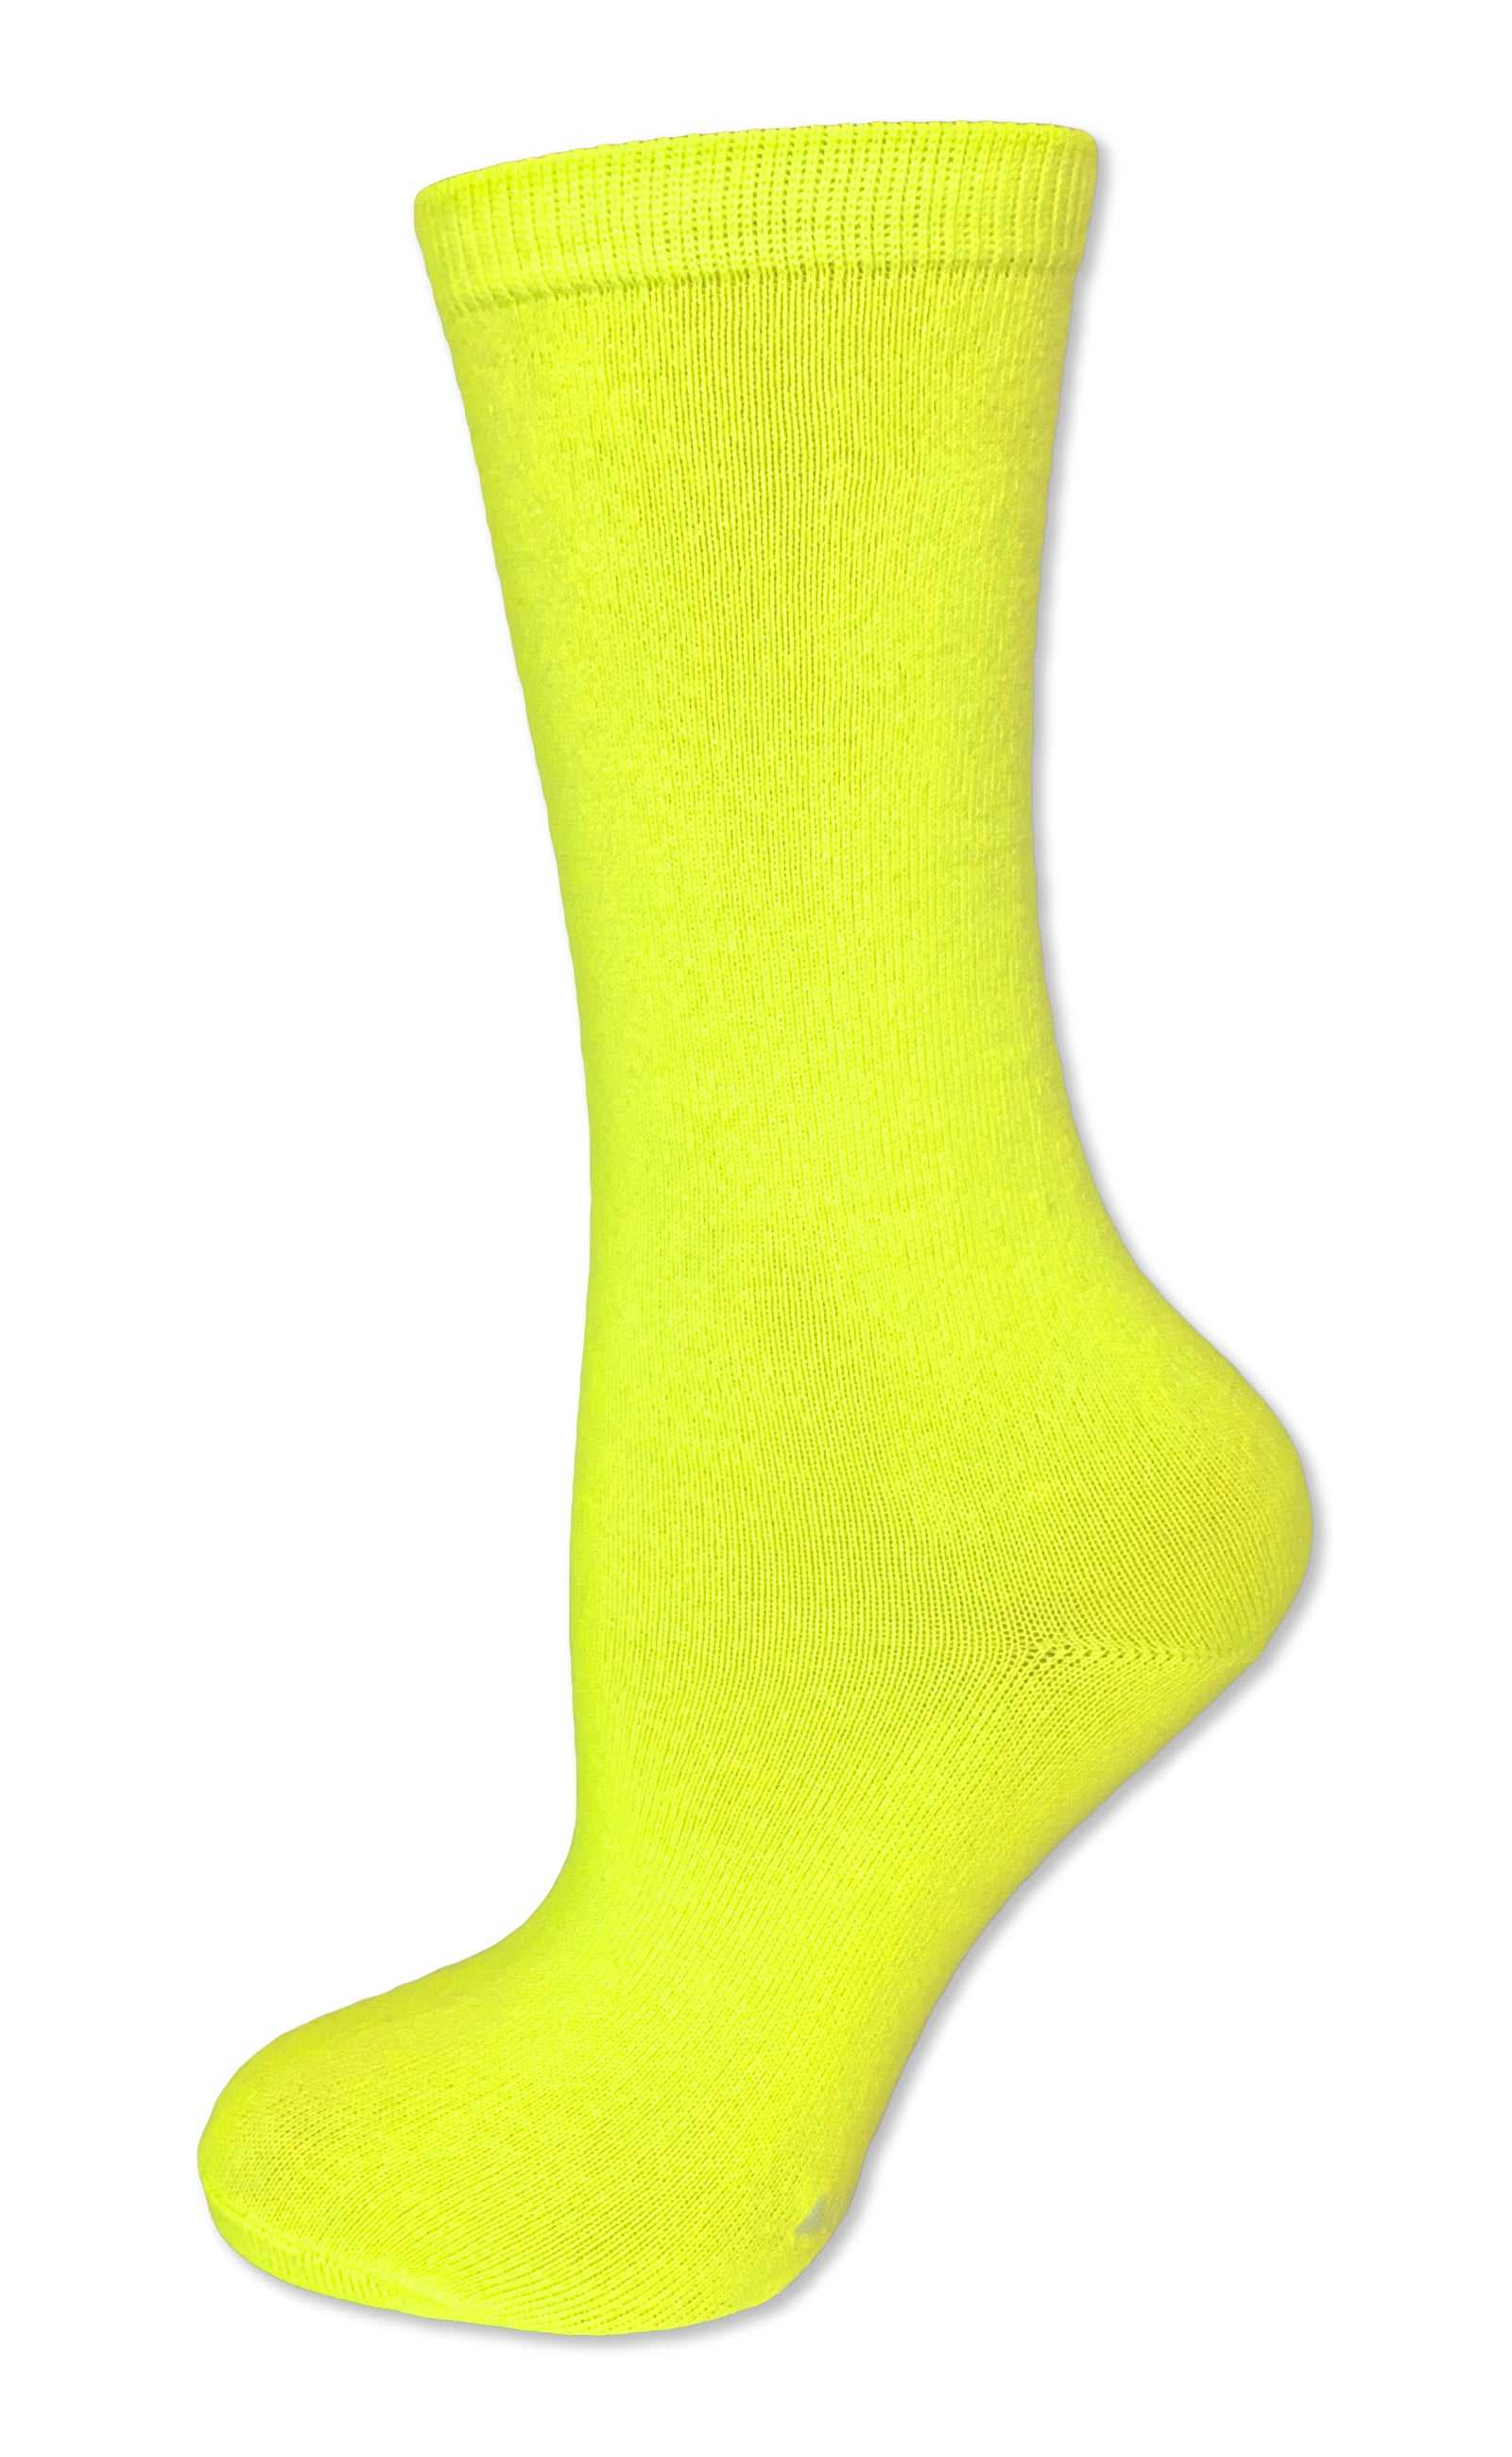 6 Pack Neon Solid Color Calf High Crew Socks